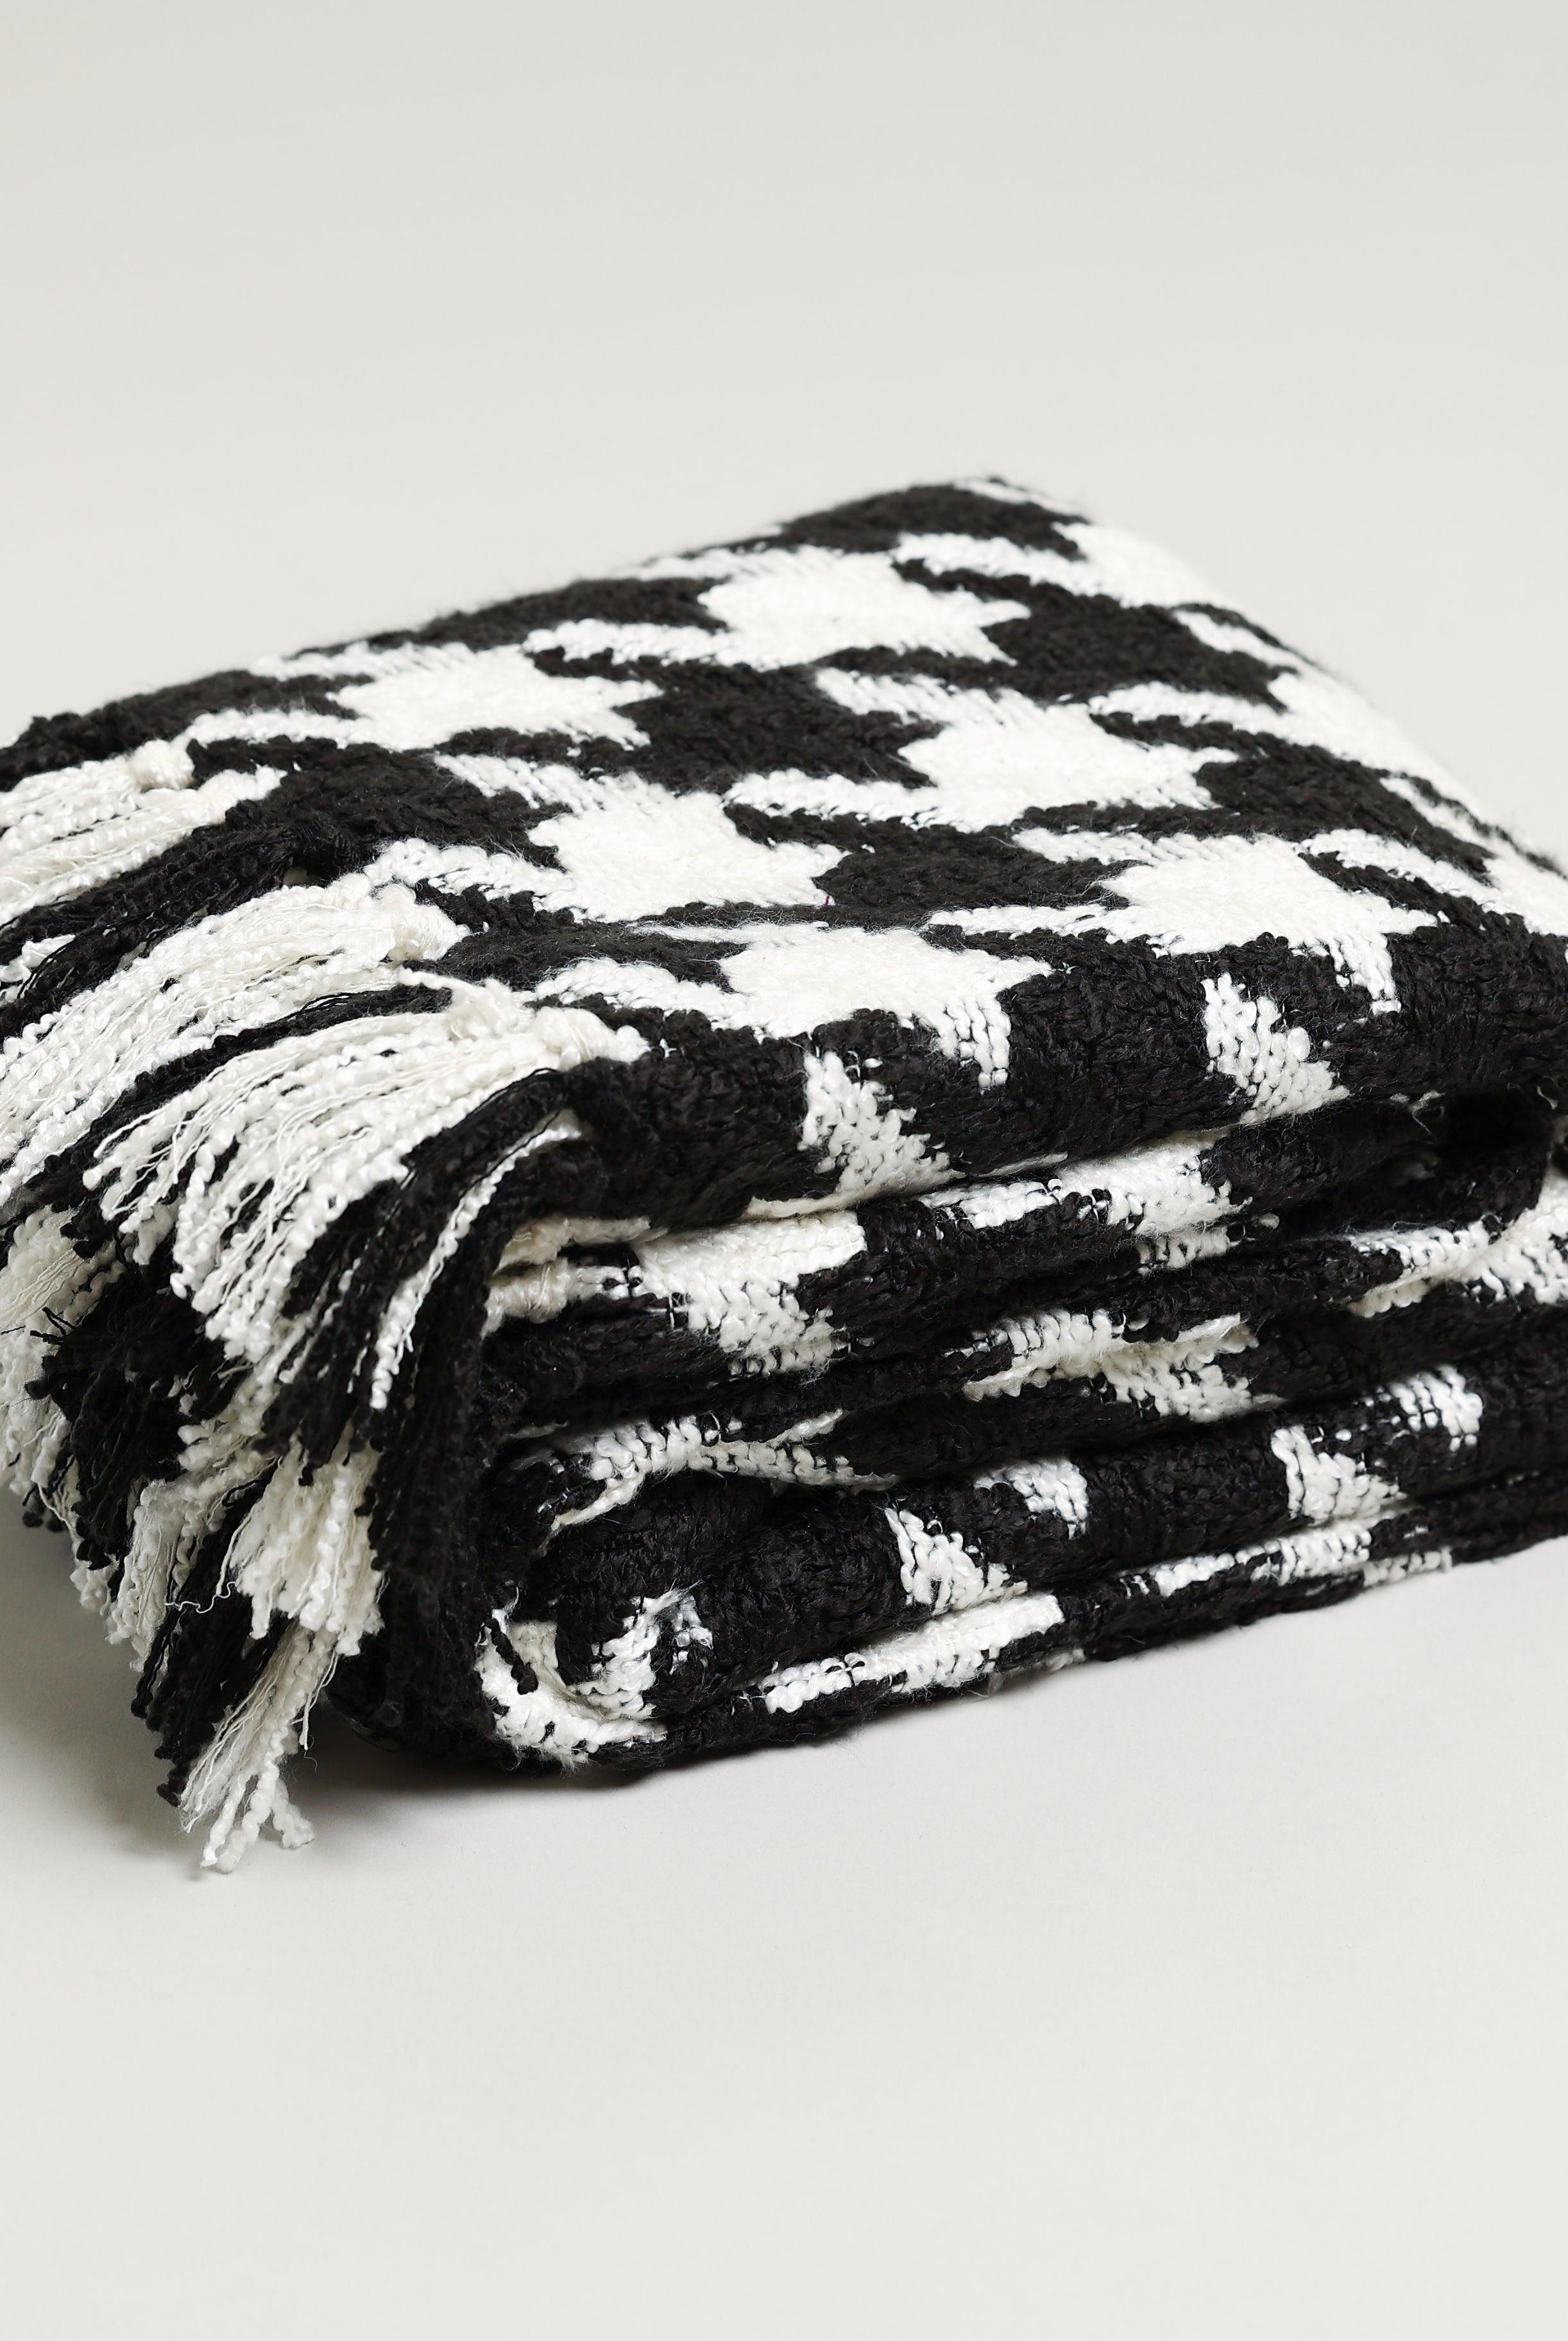 chunky black and white houndstooth popular throw blanket with black and white tassels